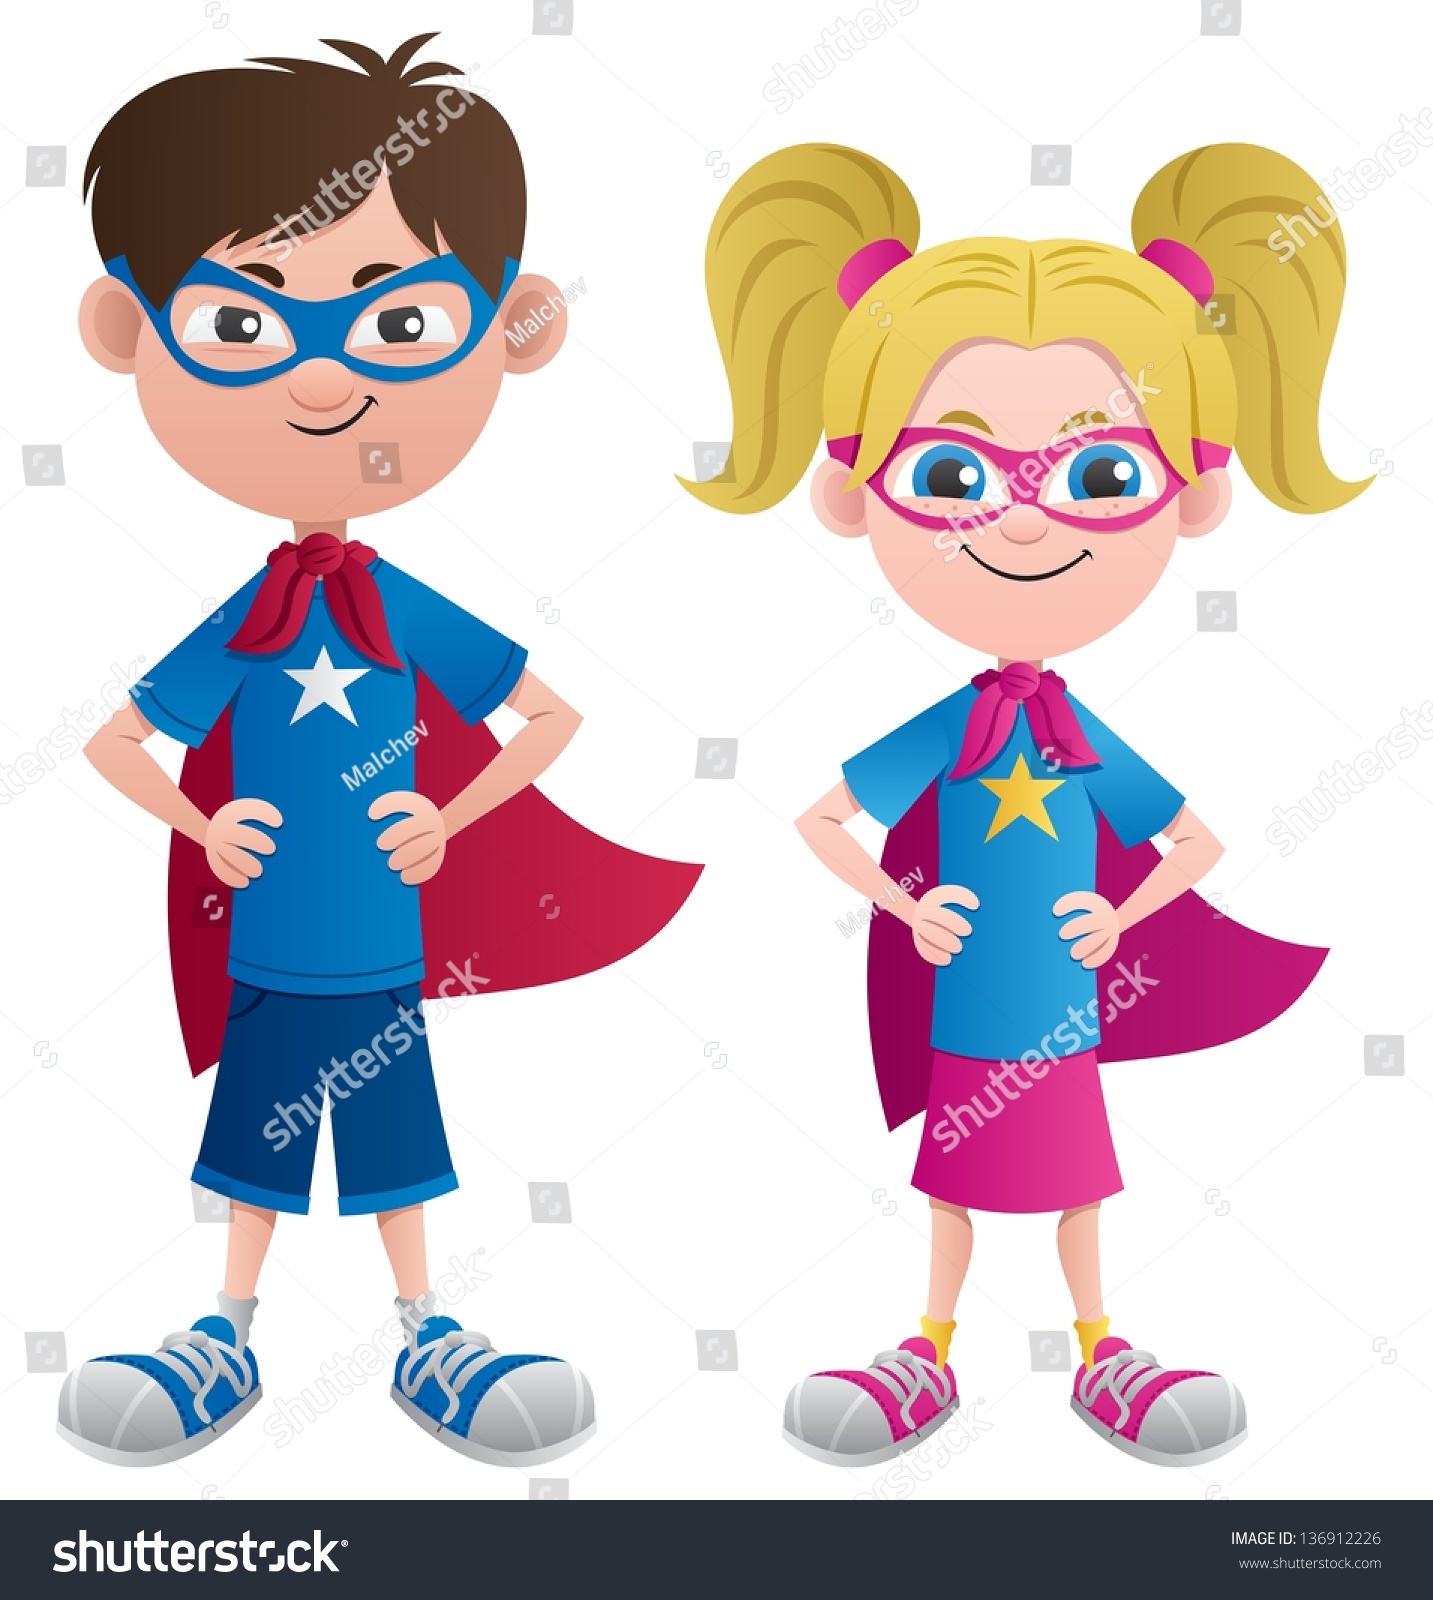 dress up clipart free - photo #18